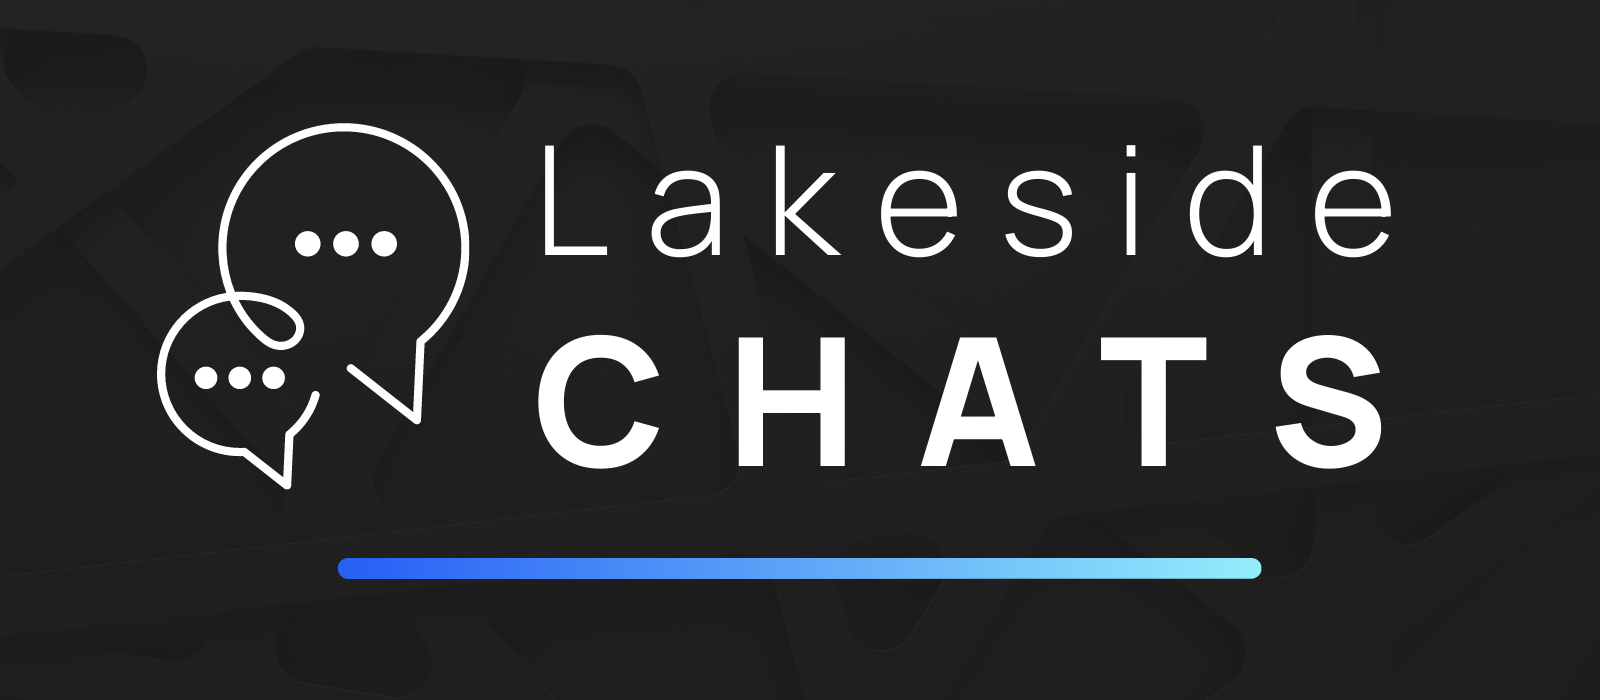 Lakeside Chats on black background with text bubbles